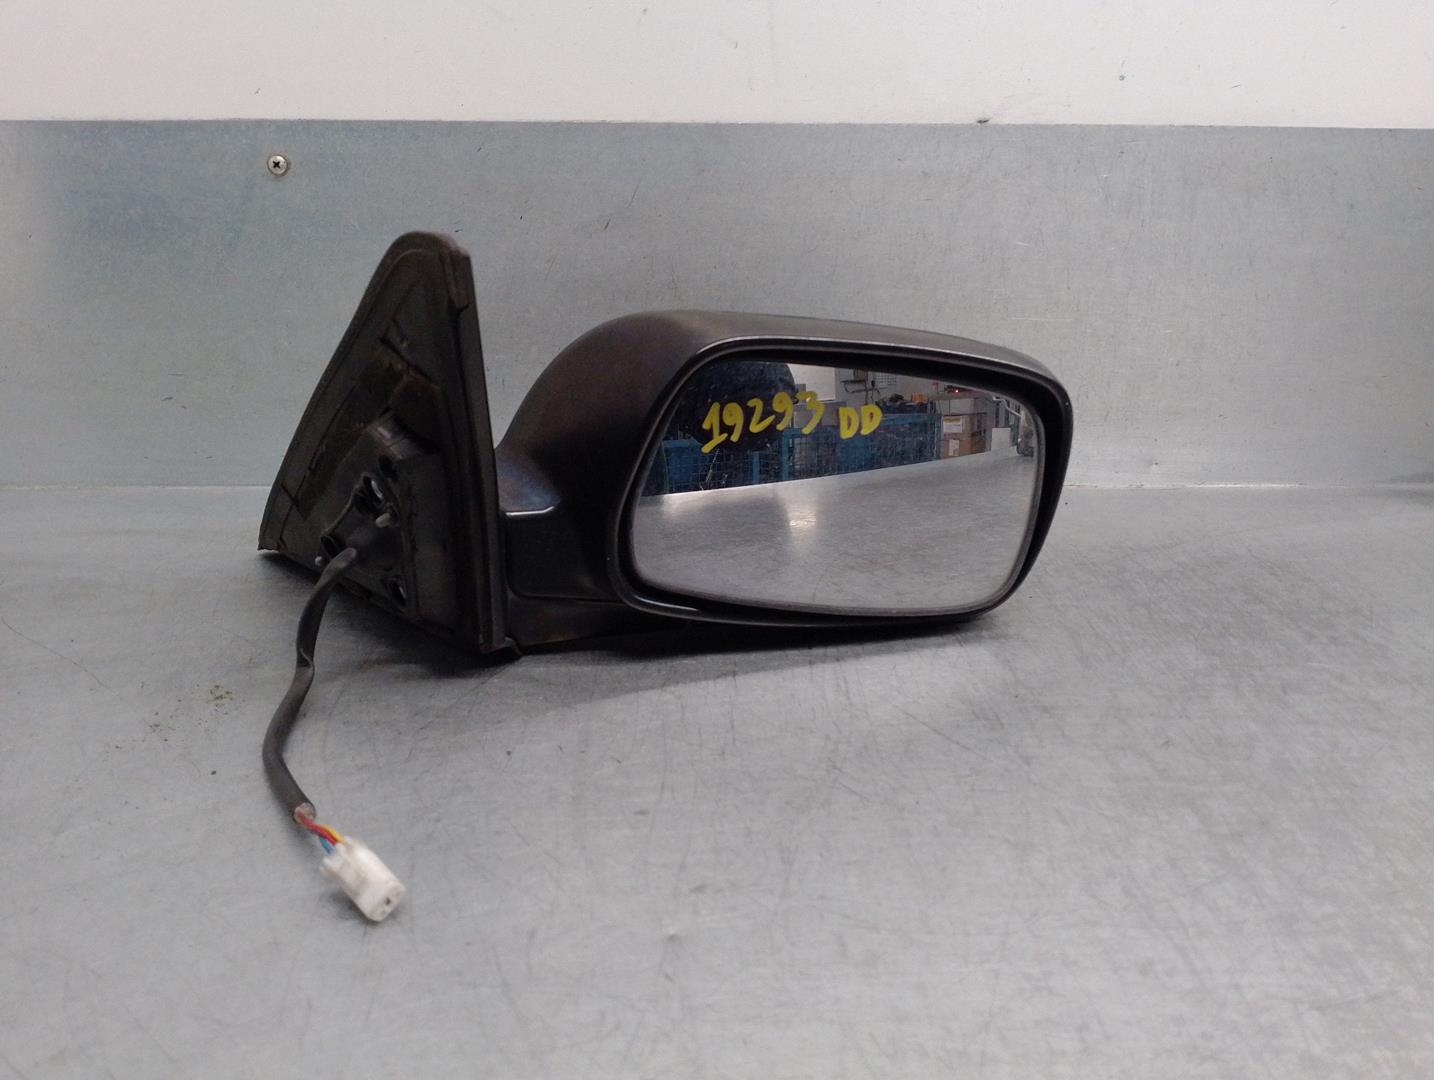 TOYOTA Avensis 2 generation (2002-2009) Right Side Wing Mirror 8790805200, 3PINES, 4PUERTAS 24183495